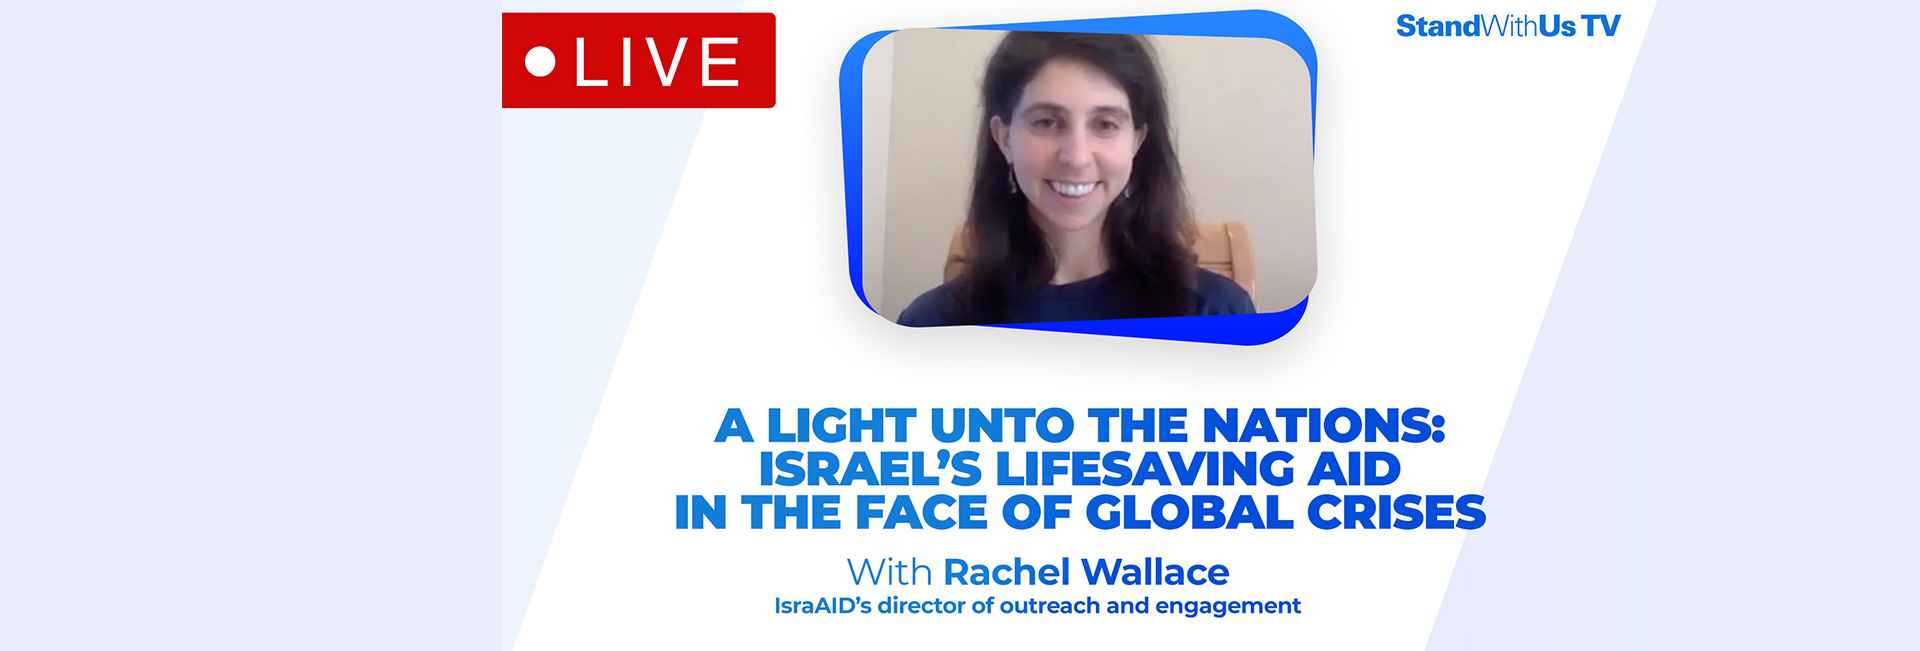 A Light Unto the Nations: Israel’s Lifesaving Aid in the Face of Global Crises